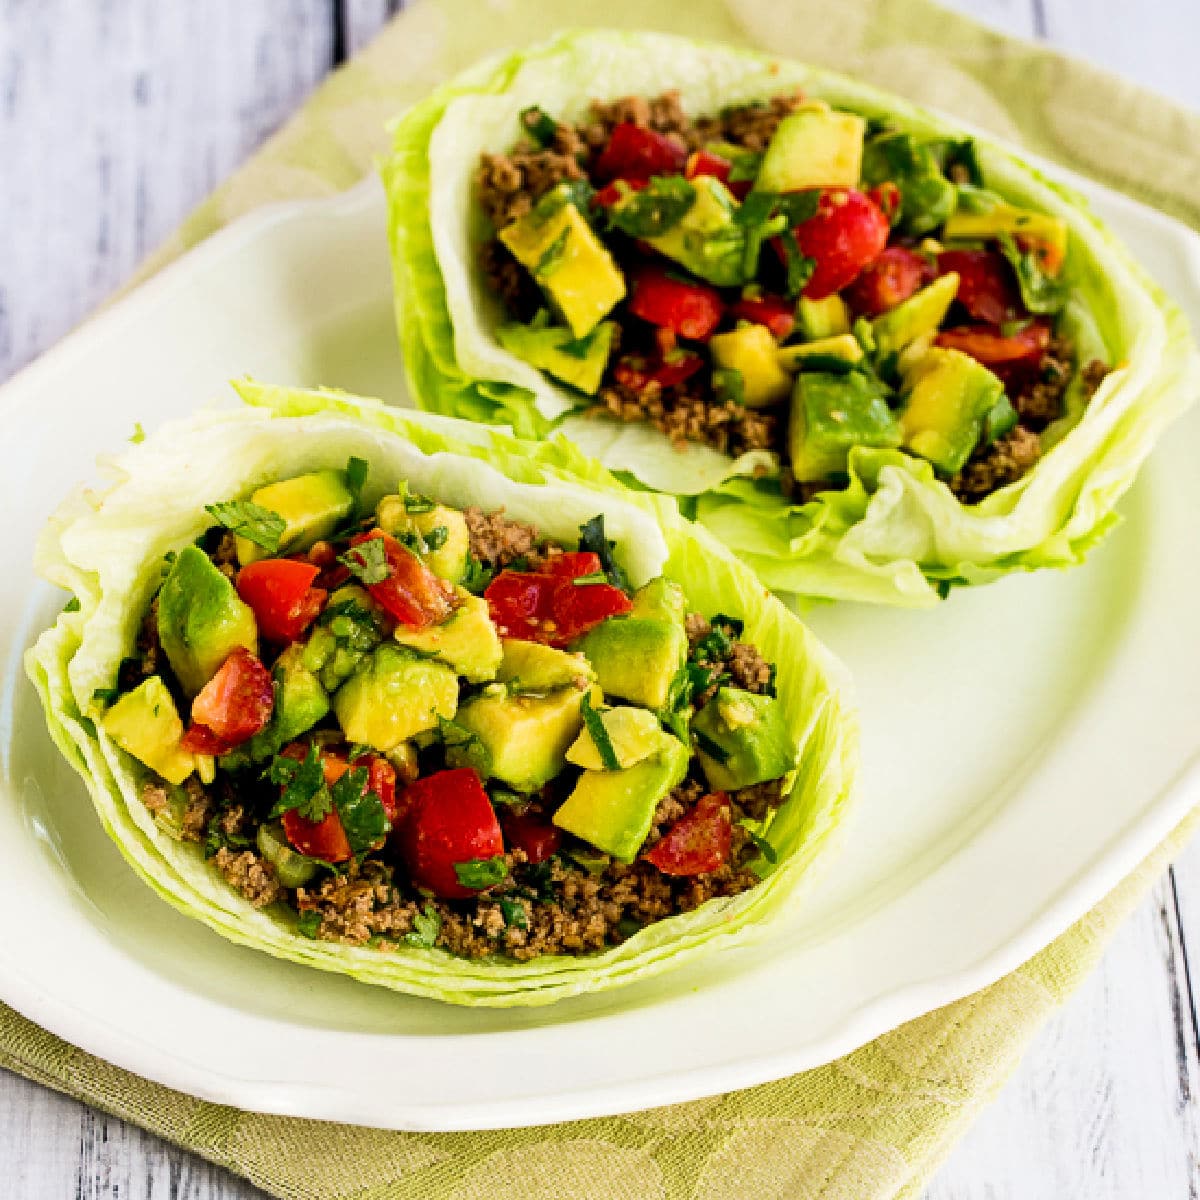 Square image of Turkey Lettuce Wrap Tacos with two taco lettuce wraps on serving plate.